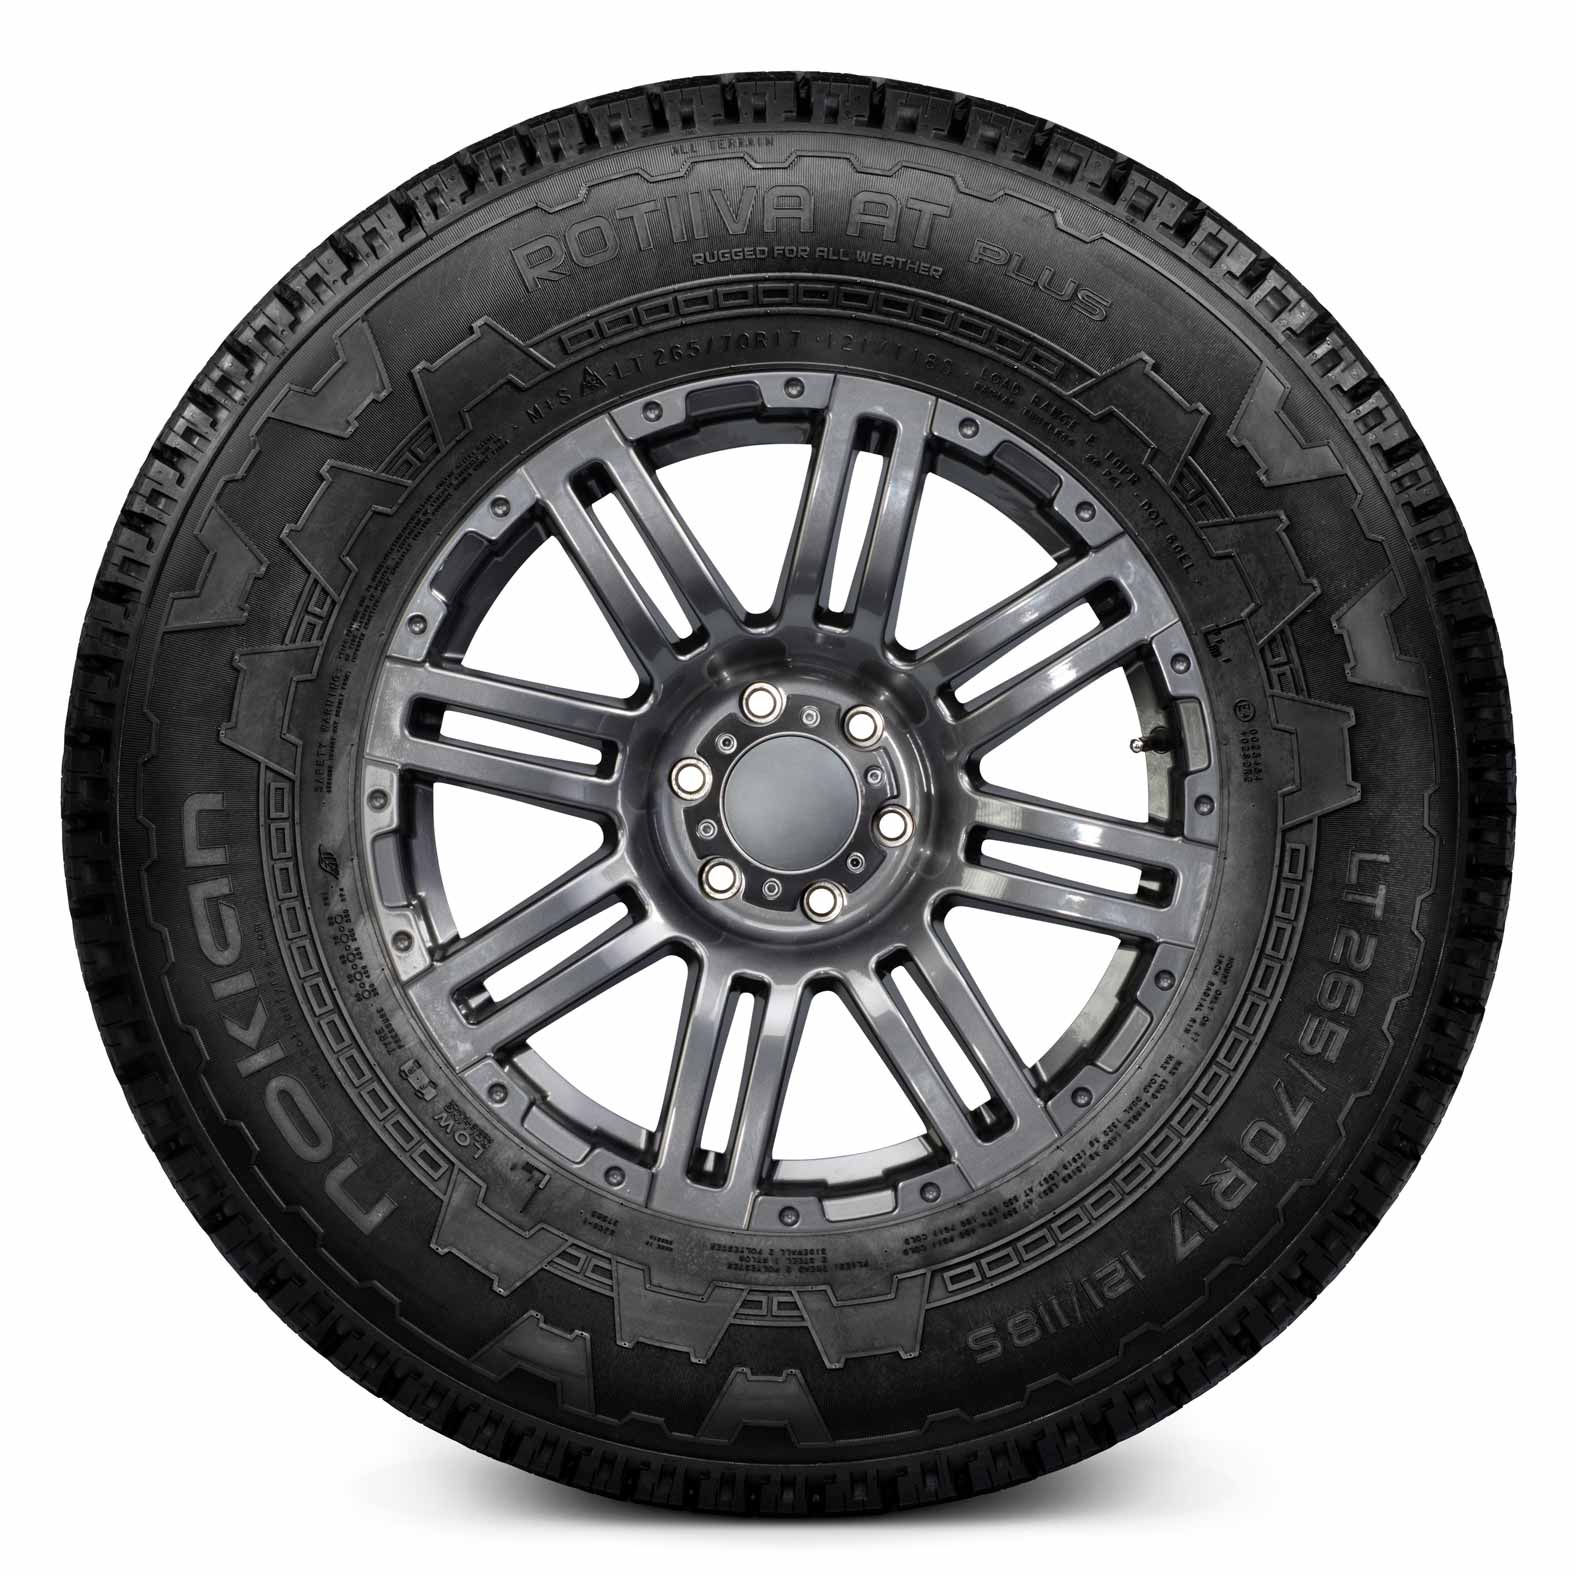 | Nokian All-Terrain Kal for PLUS AT Tire Rotiiva Tires